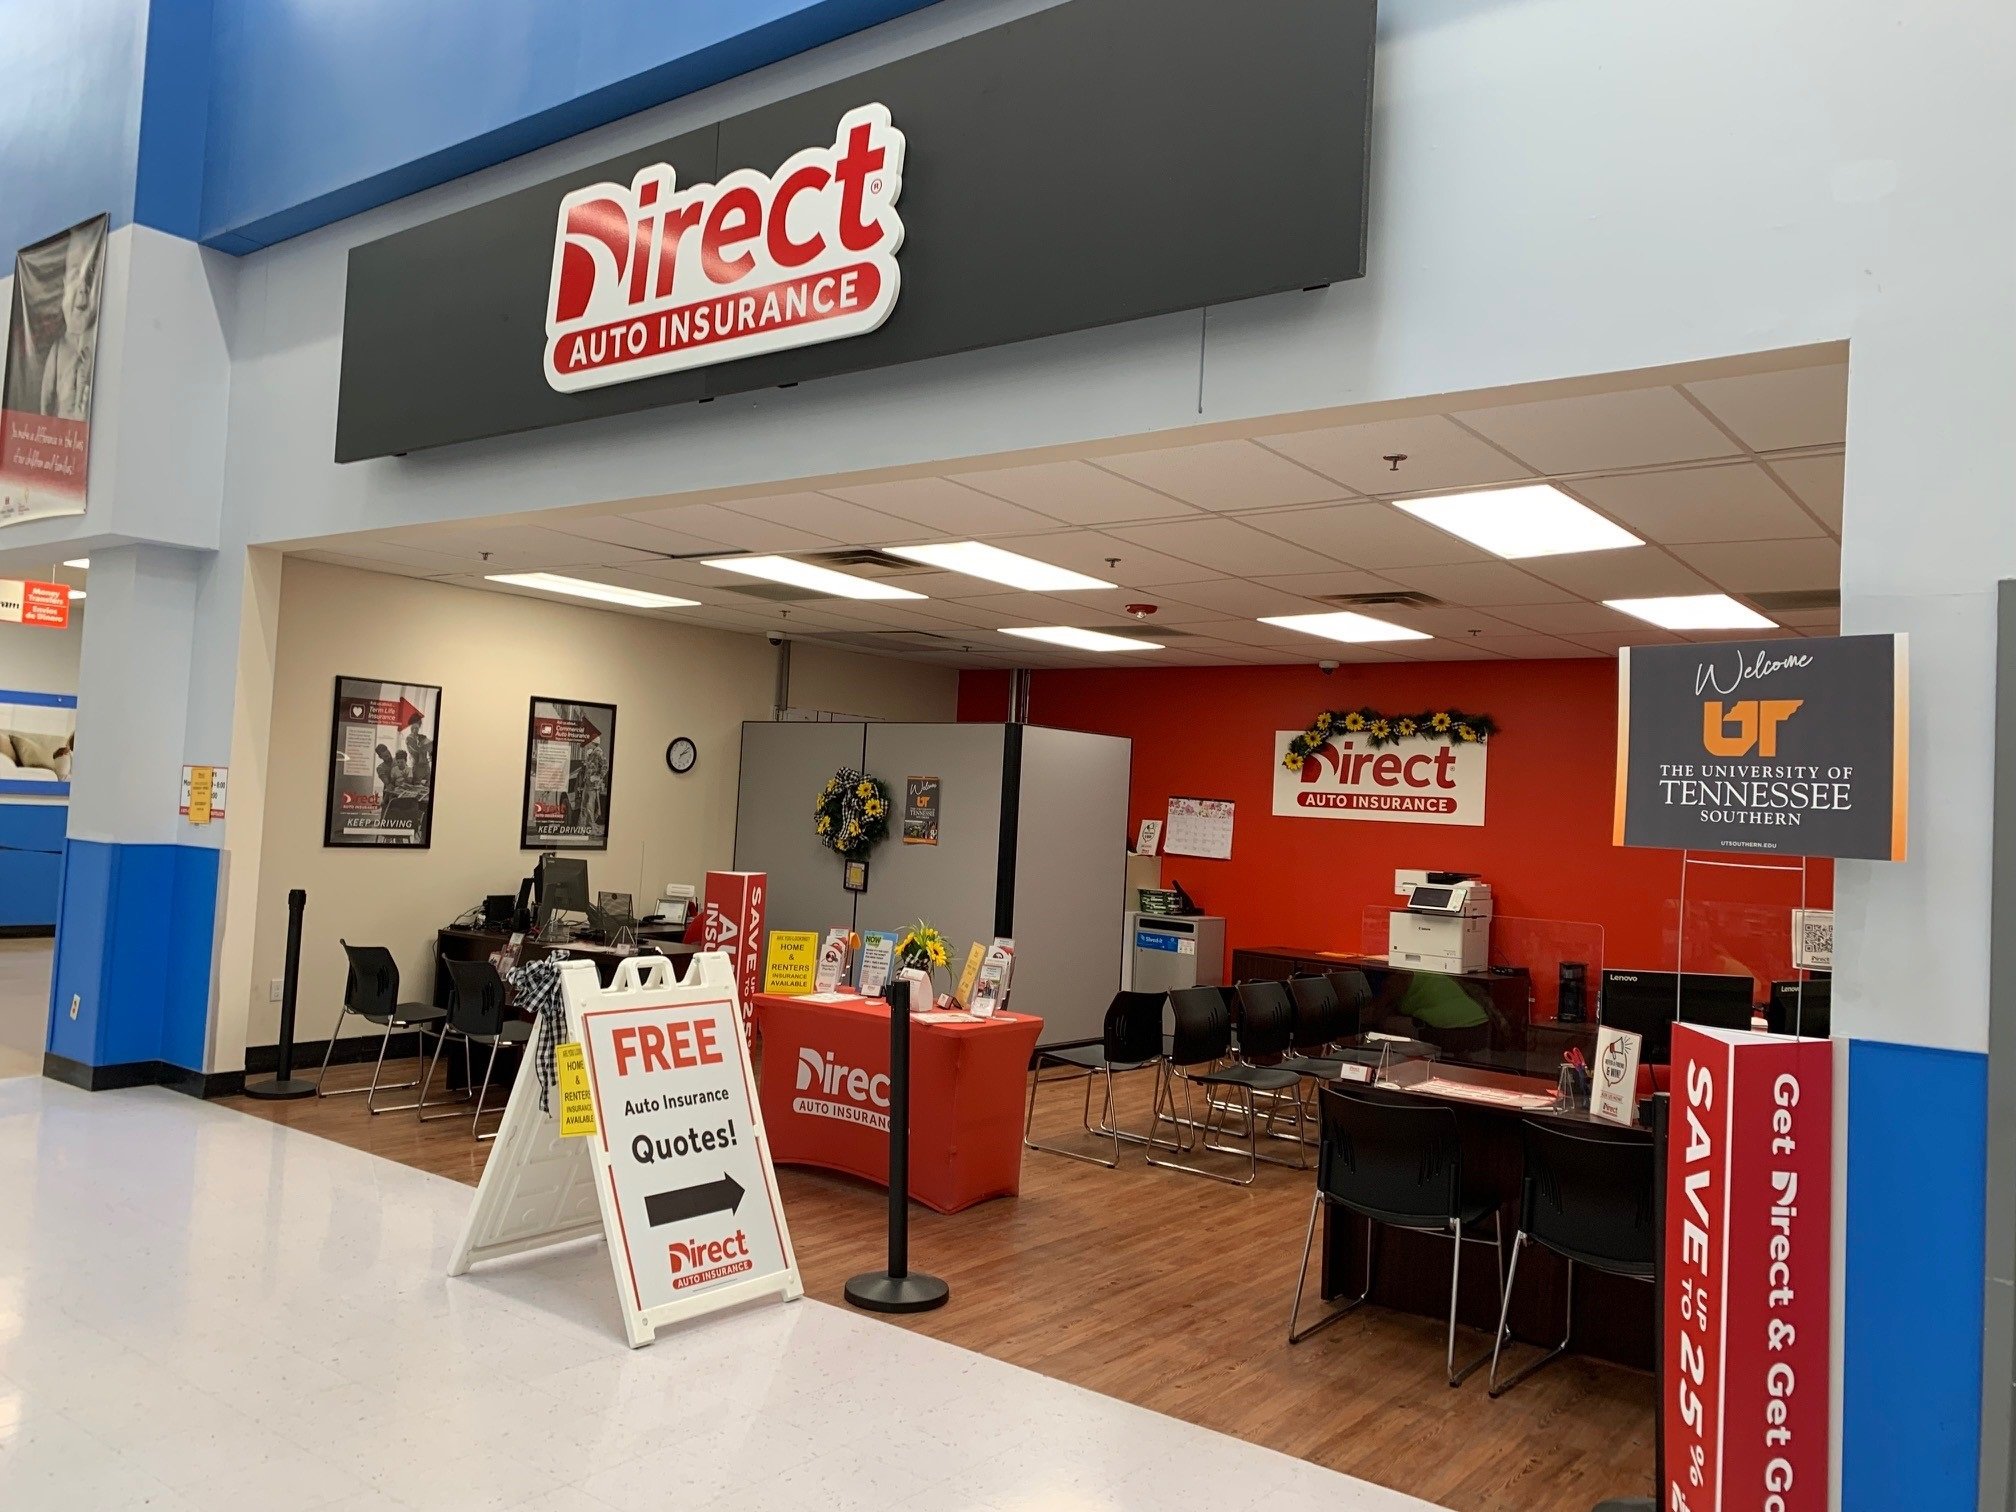 Direct Auto Insurance storefront located at  1655 W. College St., Pulaski